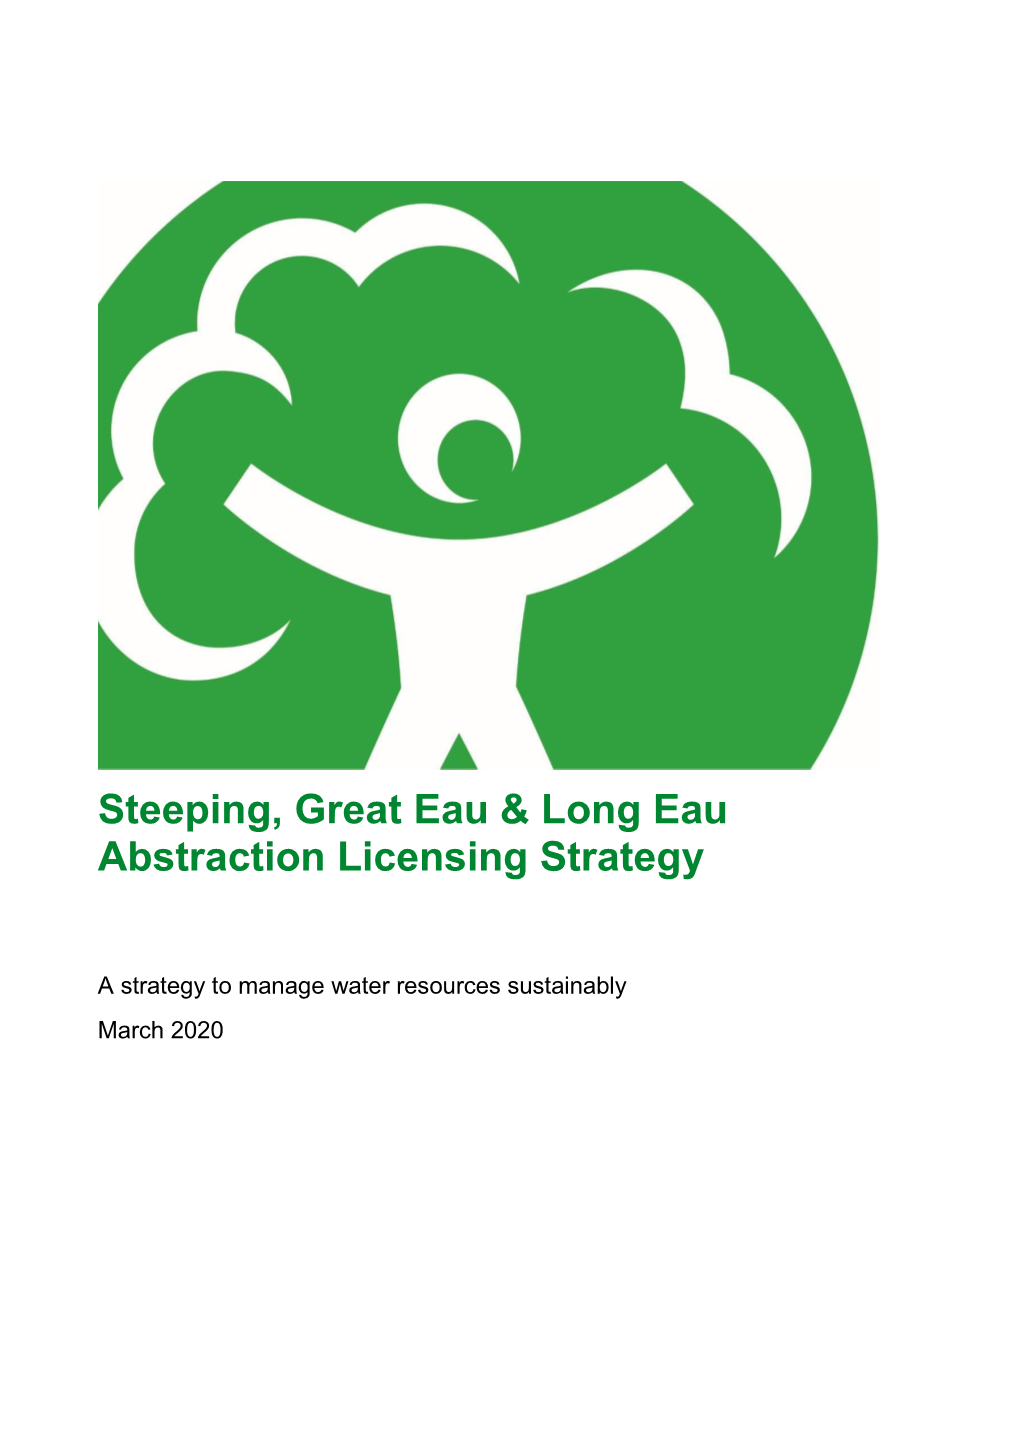 Steeping, Great Eau & Long Eau Abstraction Licensing Strategy